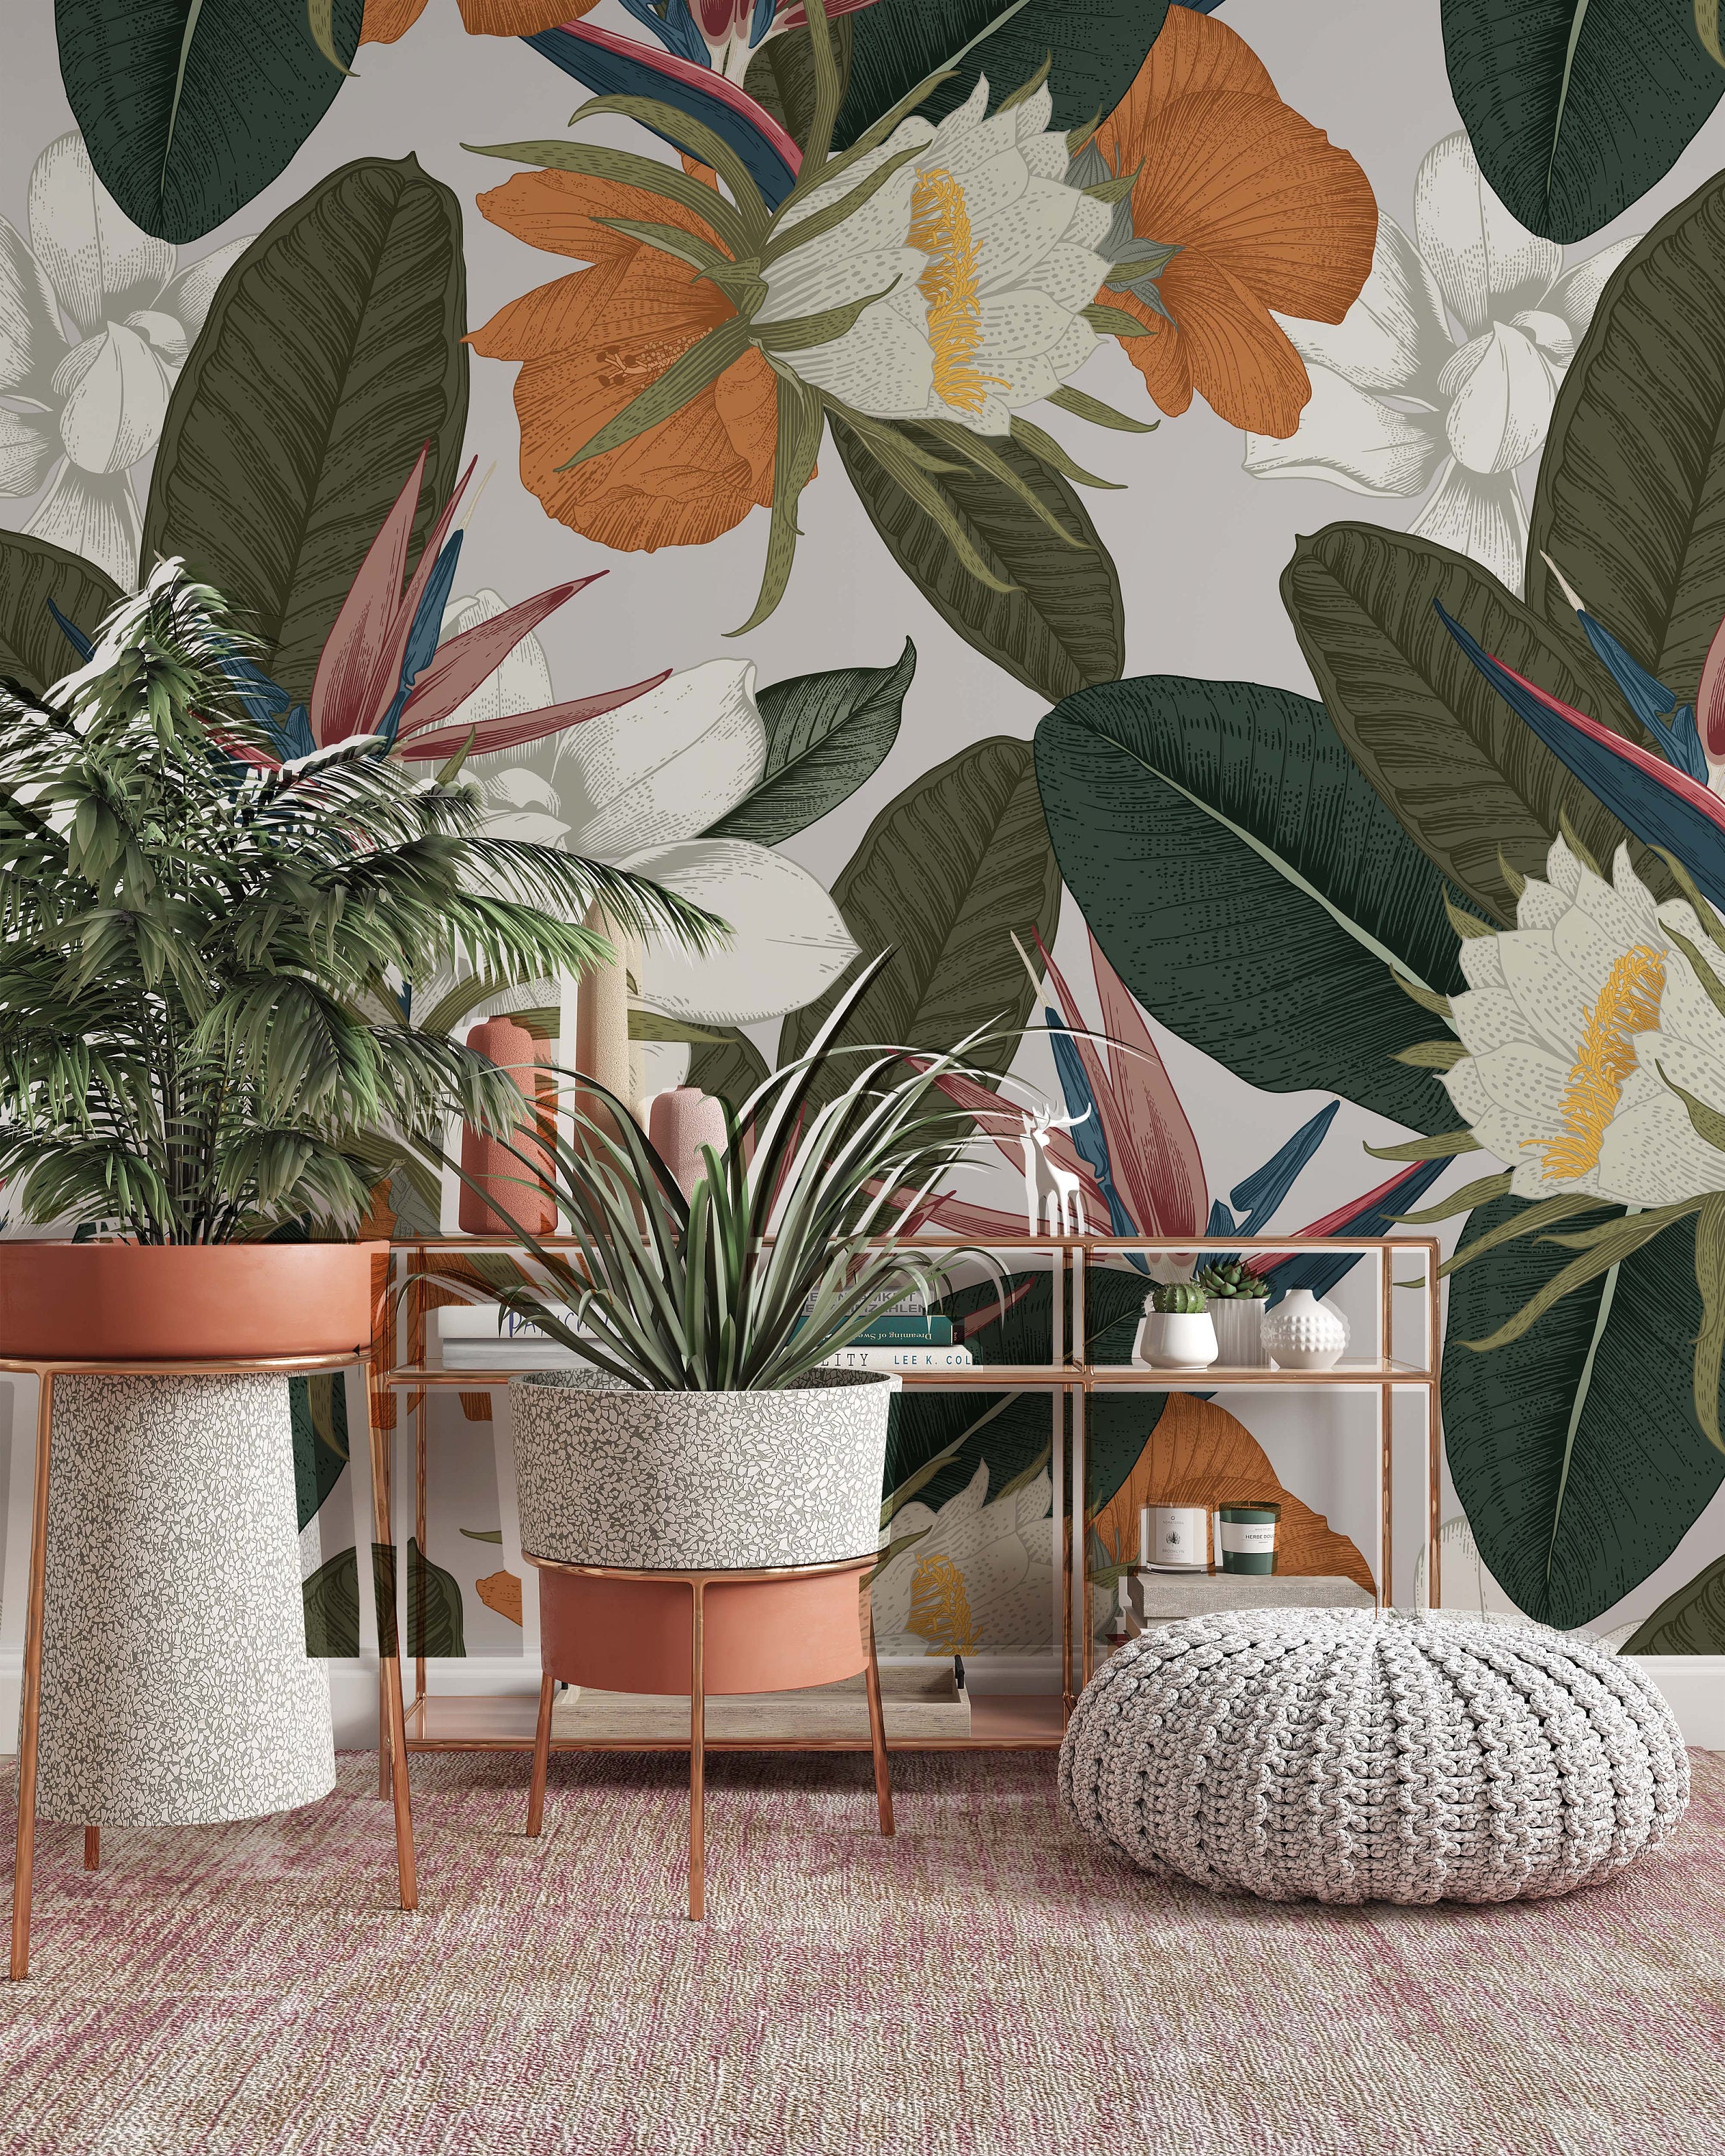 Floral Pattern with Tropical Flowers on Light Background Wallpaper Restaurant Living Room Cafe Office Bedroom Mural Home Wall Art